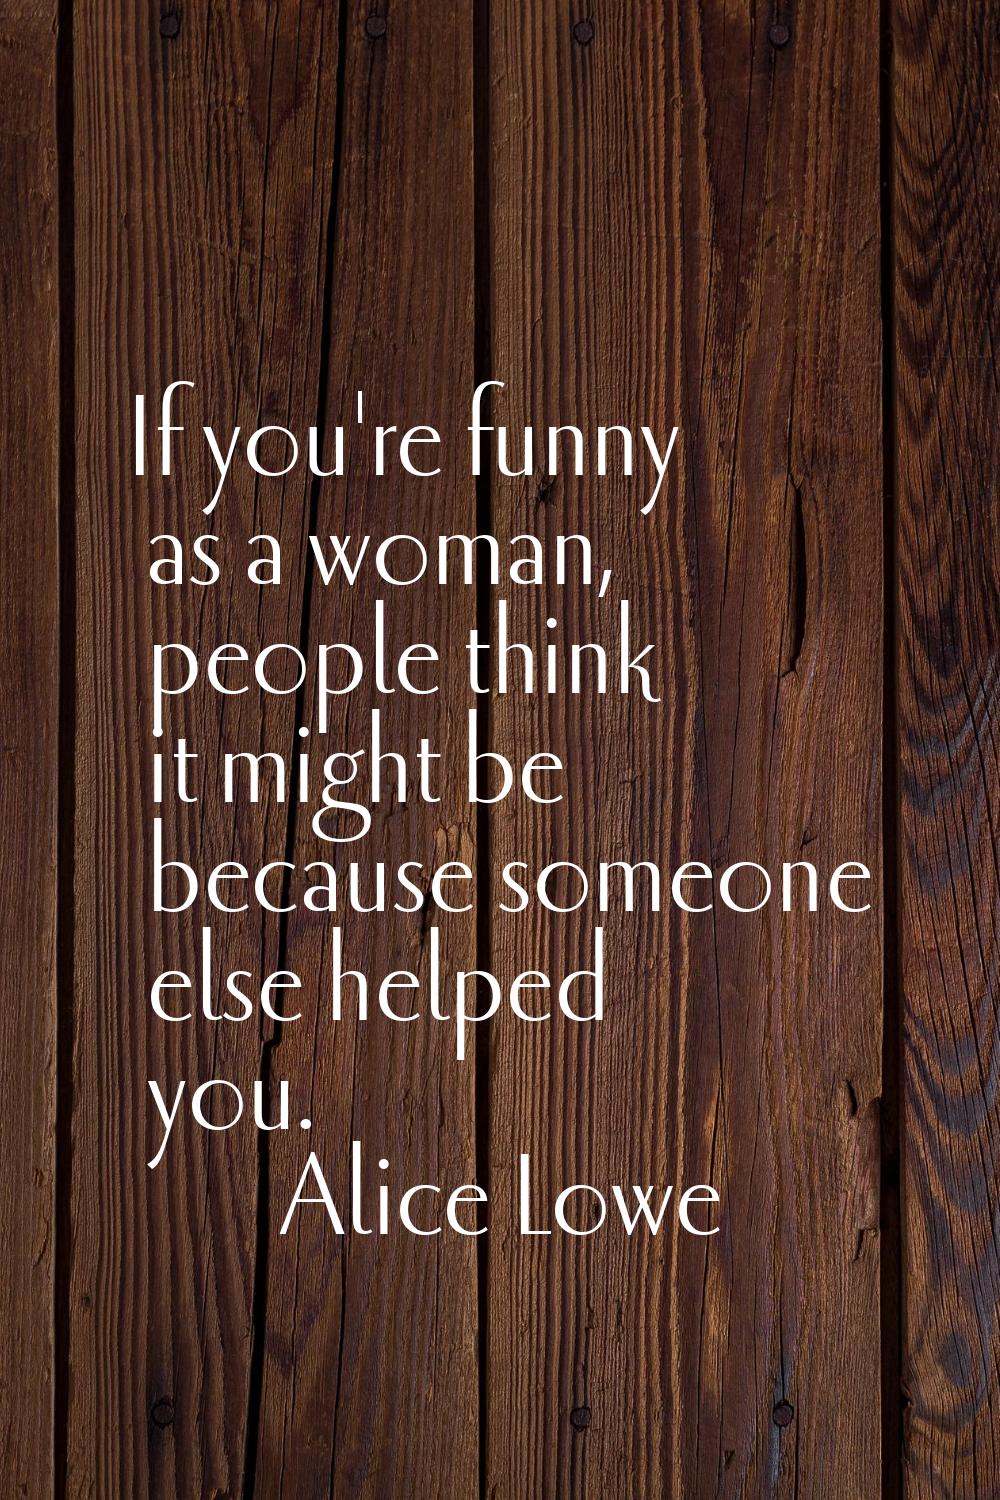 If you're funny as a woman, people think it might be because someone else helped you.